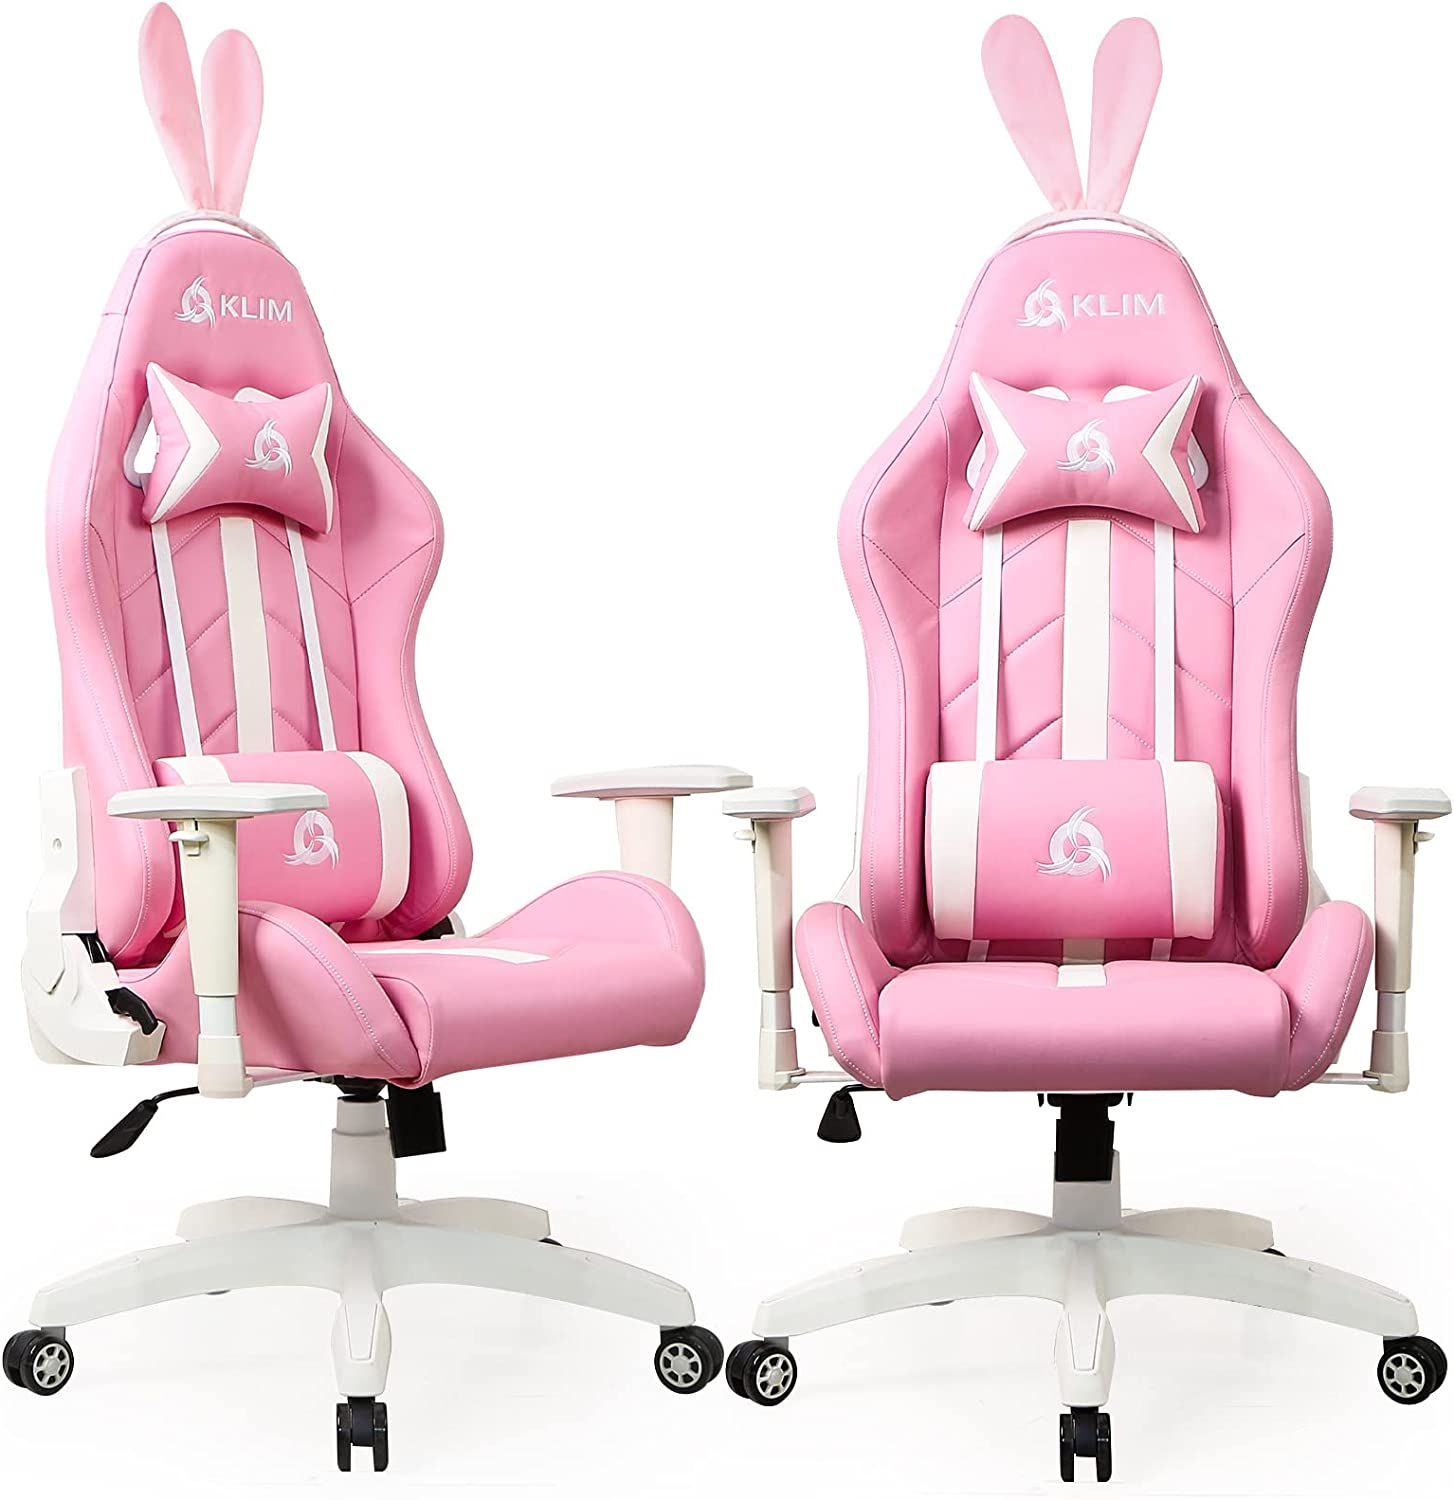 gaming chair pink